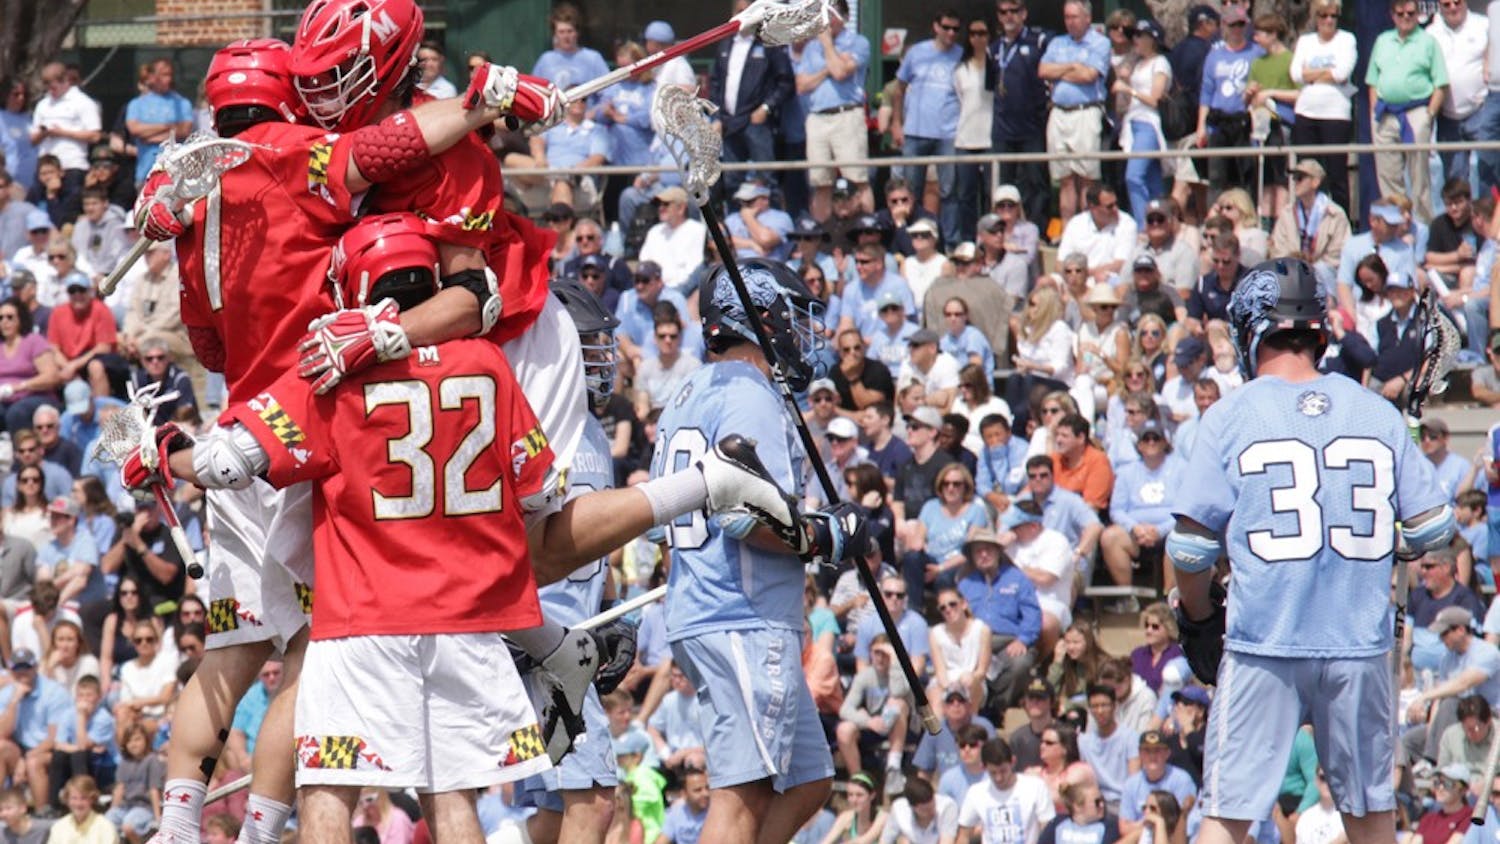 Maryland lacrosse players celebrate a goal during the first half of their 15-7&nbsp;defeat of&nbsp;UNC. North Carolina claimed the NCAA title the last time the two teams played each other in May.&nbsp;